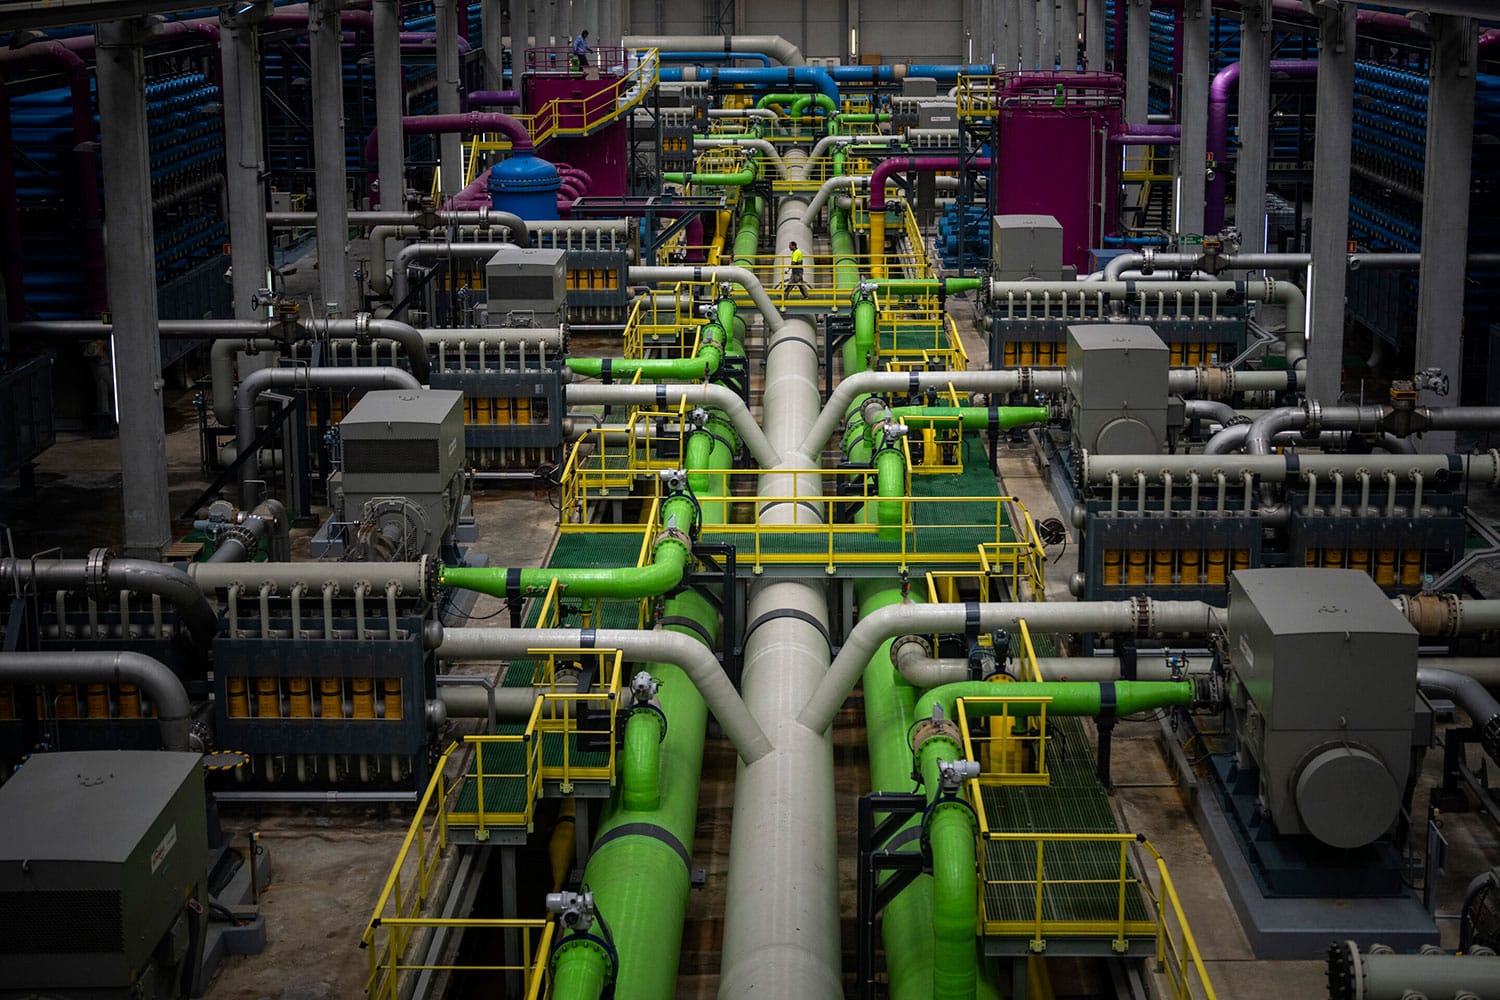 A worker walks over the pipeline that transports seawater to filters at Europe's largest desalination plant for drinking water located in Barcelona, Spain.